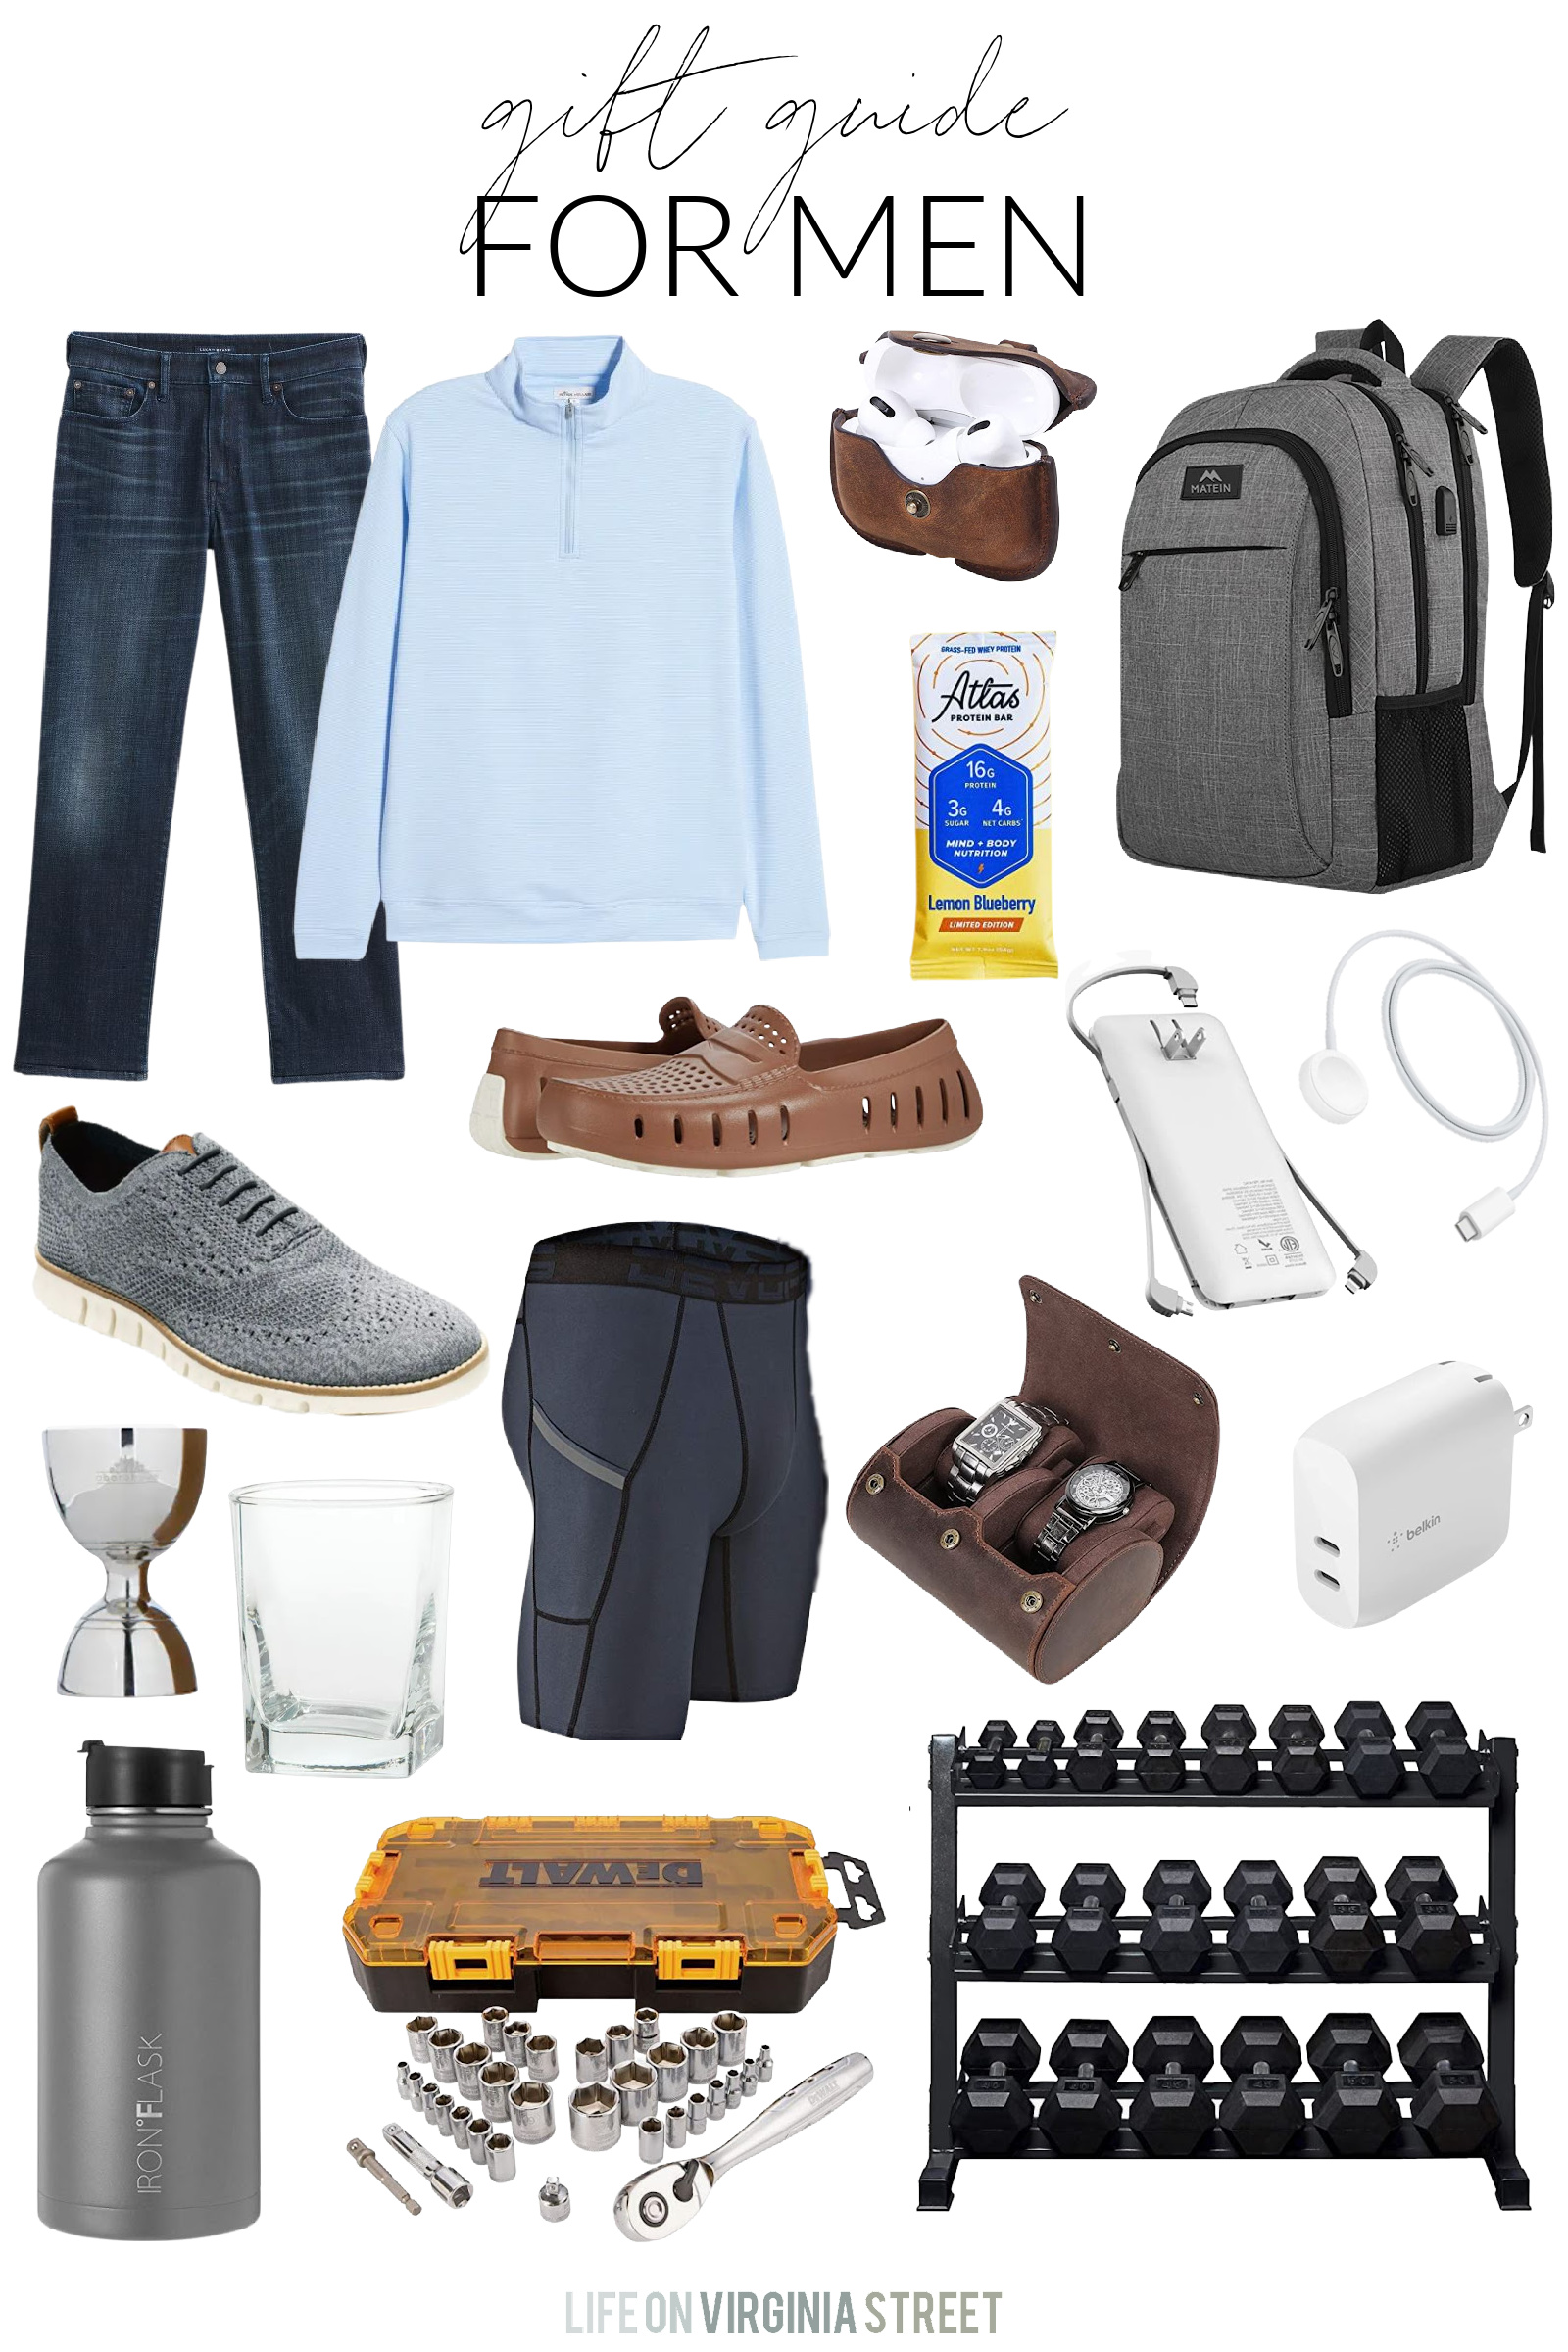 Gift Ideas for Boyfriend - Shop this now - Gift guide Men Guide Ideas #gift  #ideas #men #boyfriend #l…